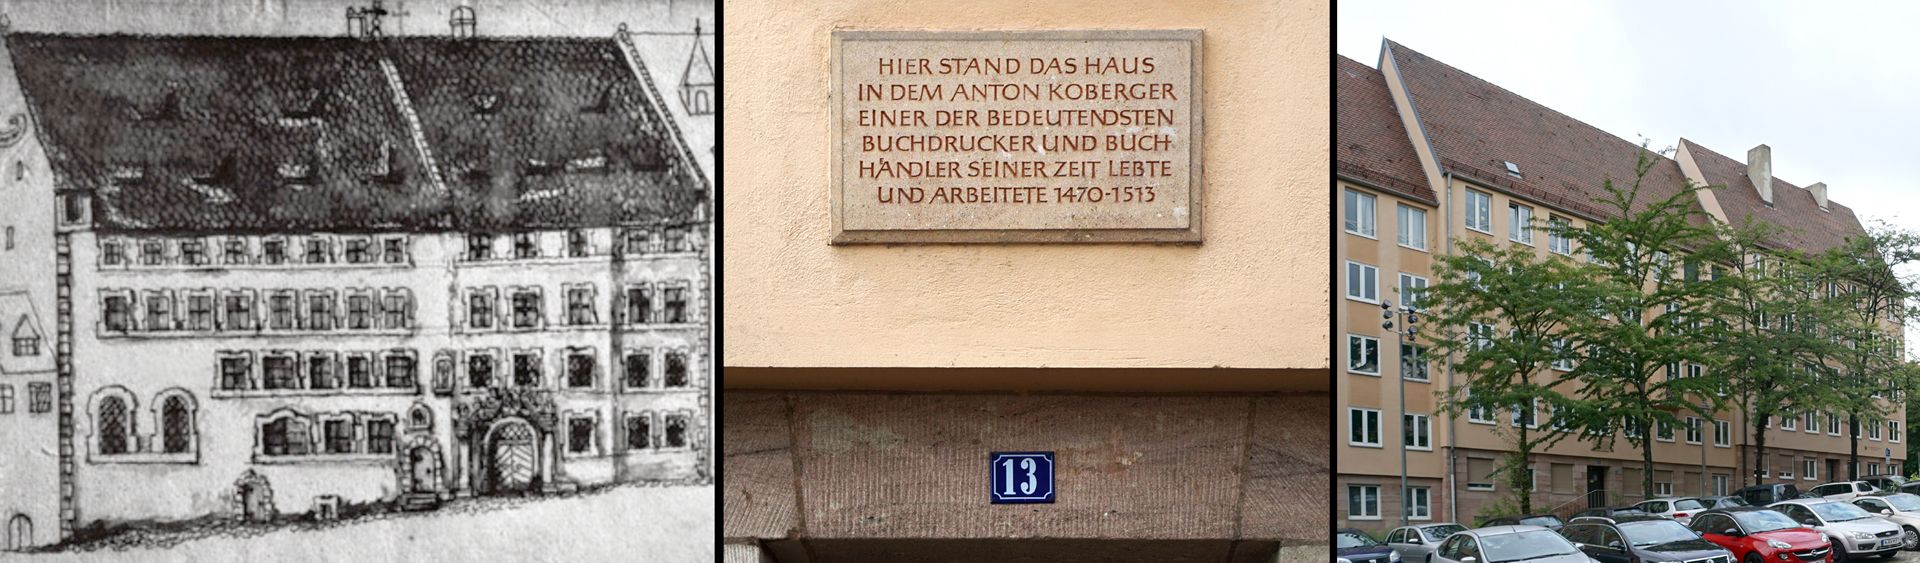 Small studio of Anton Koberger Comparison of an old engraving by Jan Boener and the present situation with memorial plaque